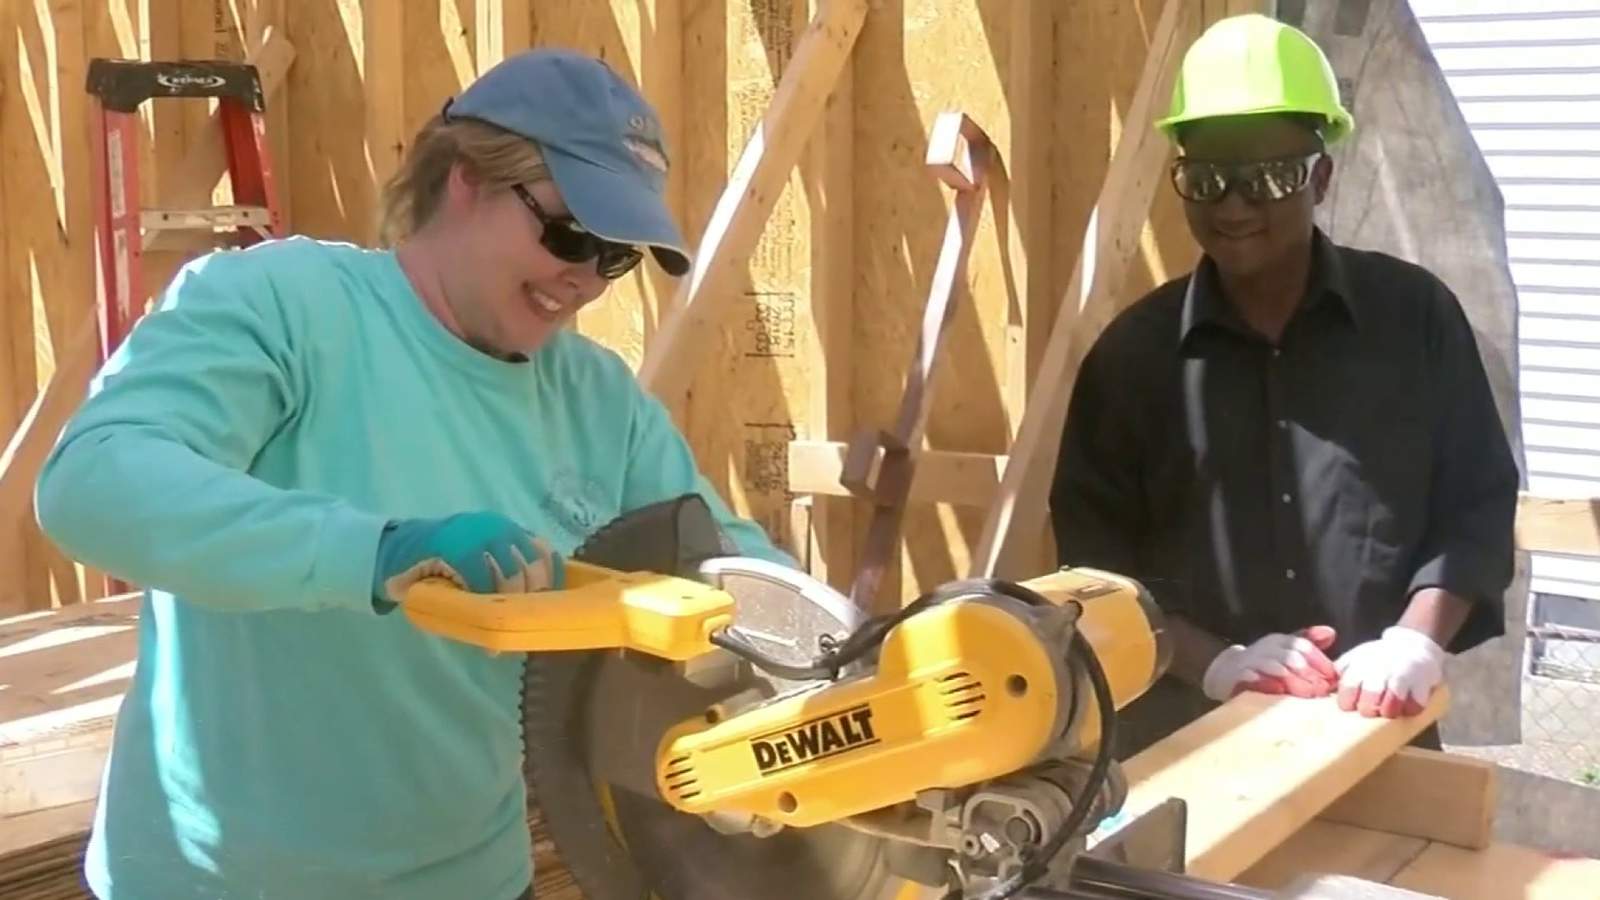 Habitat for Humanity of Franklin County celebrates new beginnings with local community